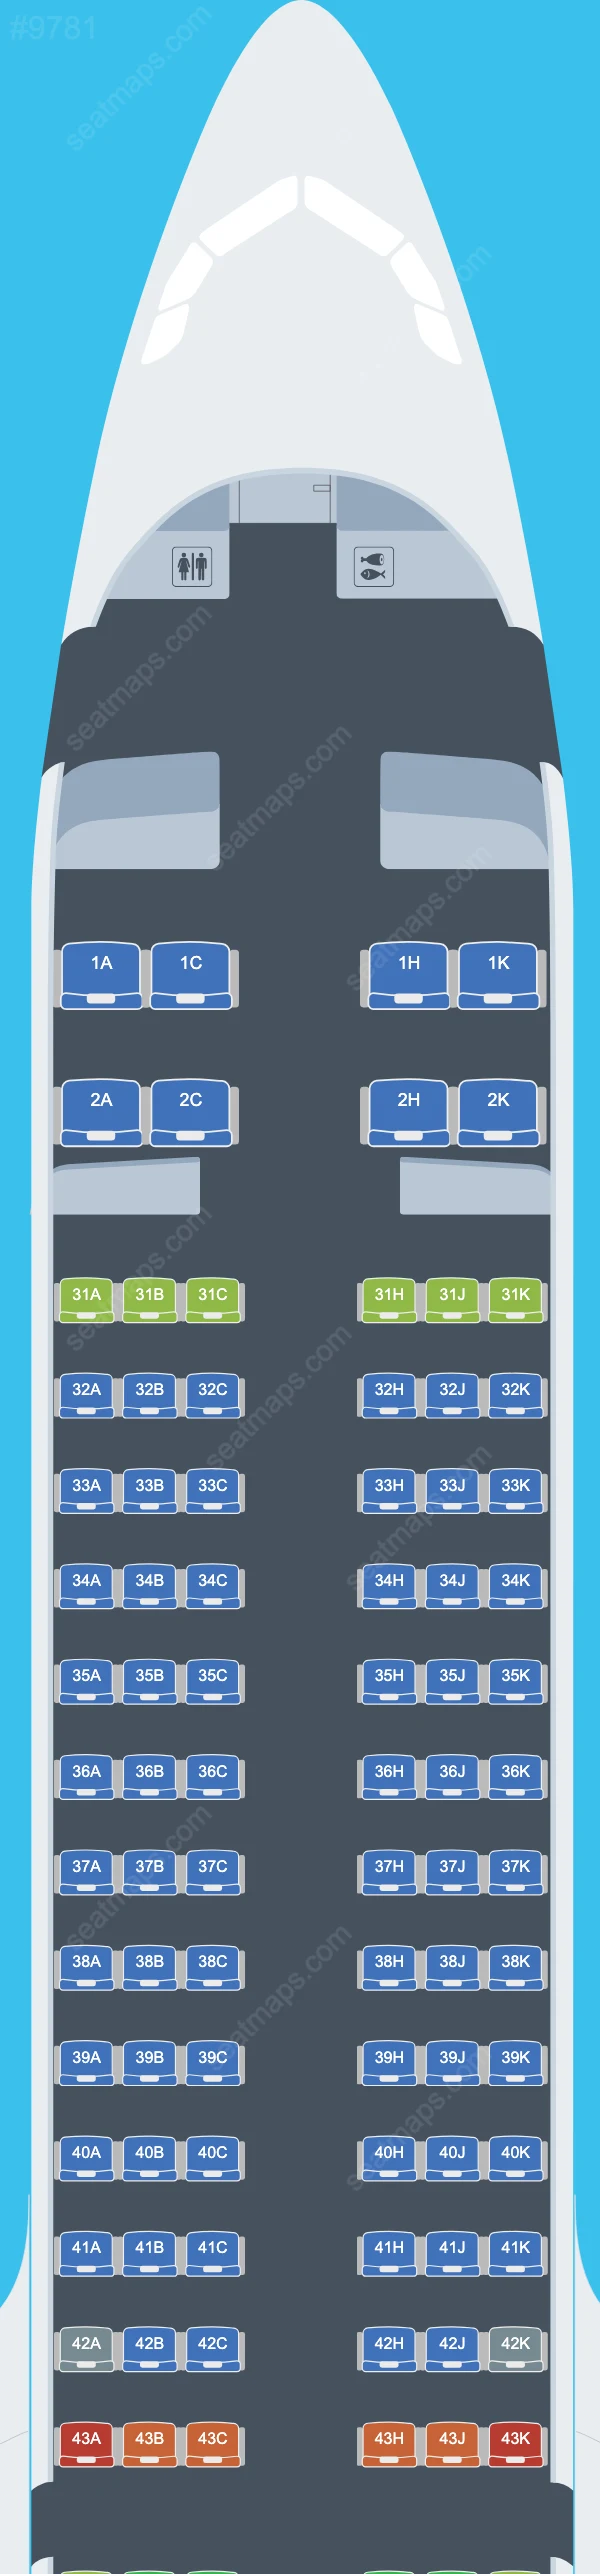 Juneyao Air Airbus A321-200neo seatmap mobile preview